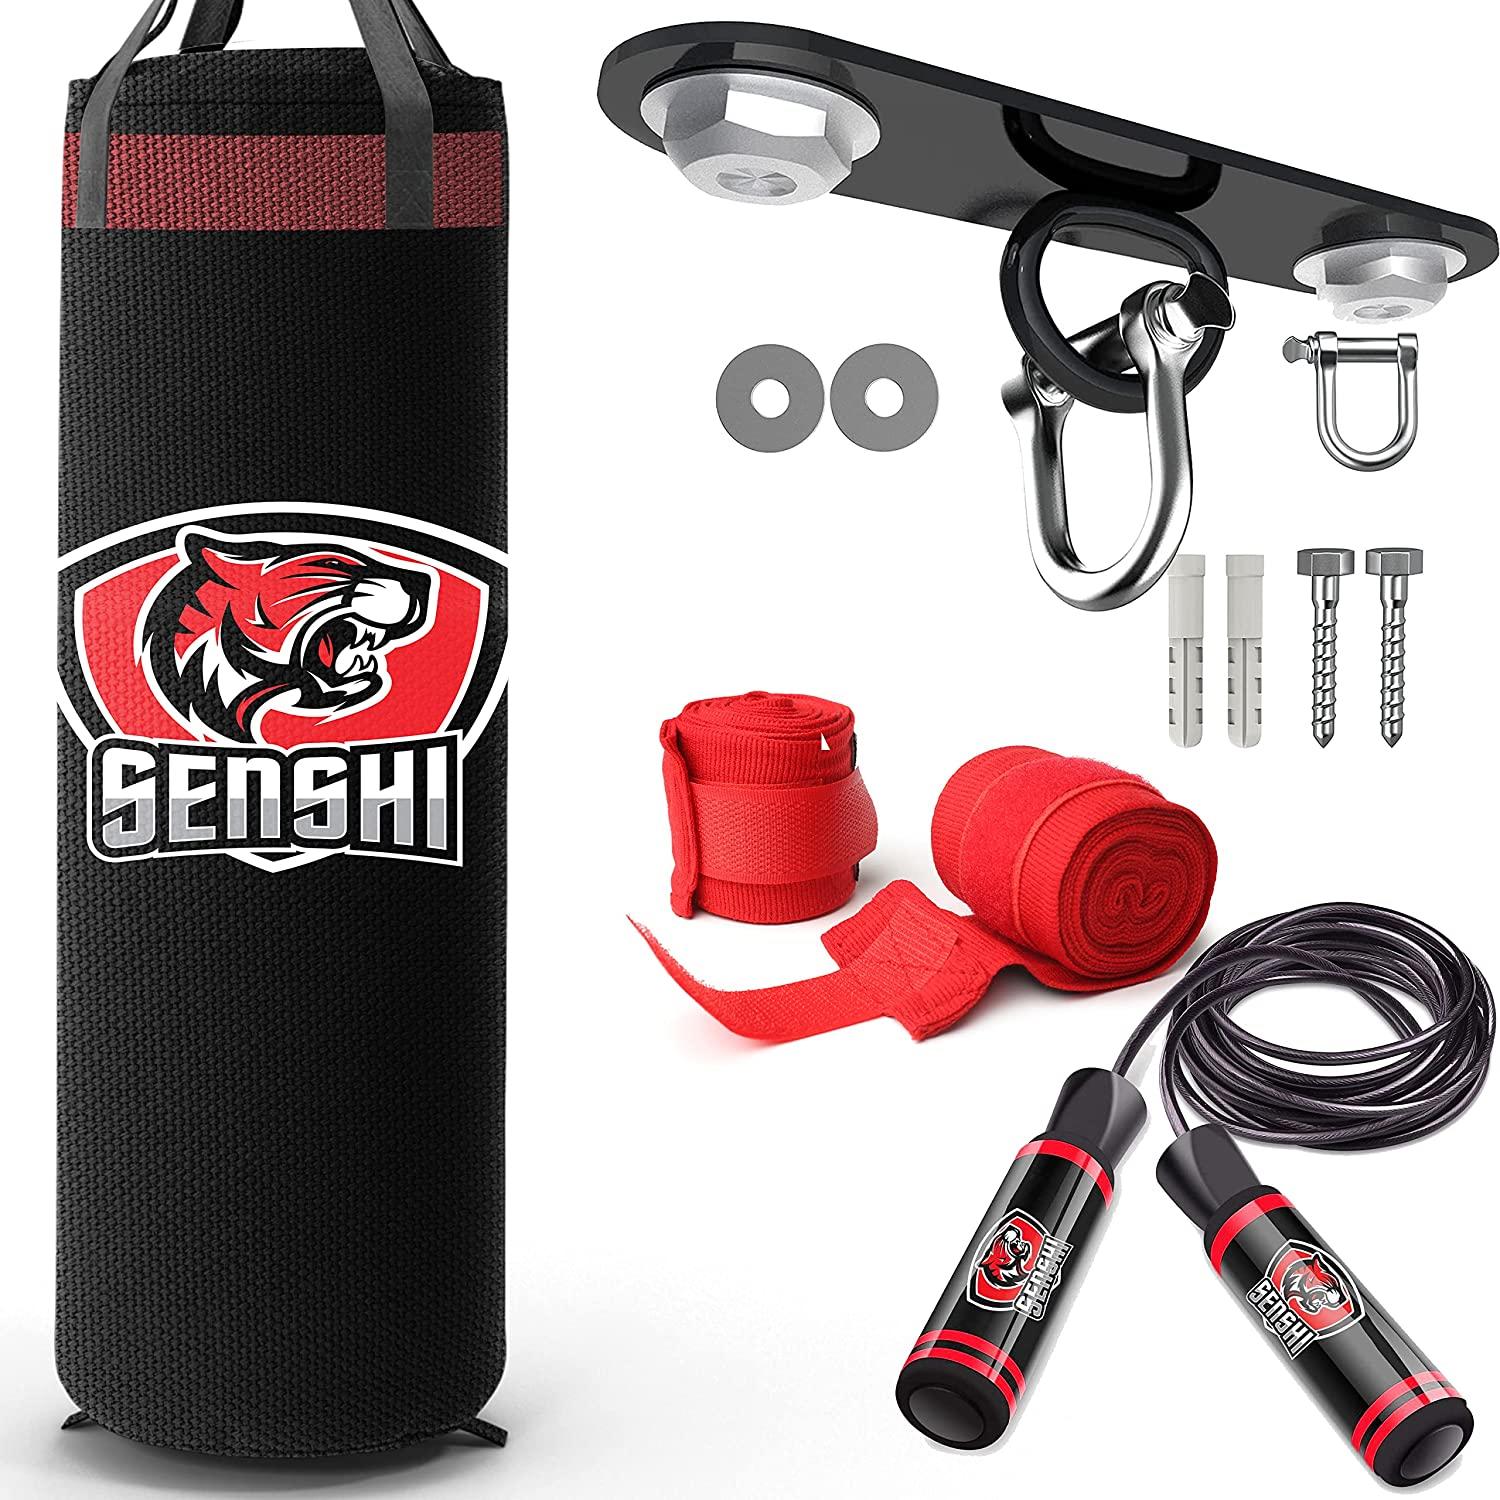 METIS Freestanding Heavy Punching BagHEAVY DUTY Boxing/MMA/Combat Equipment 